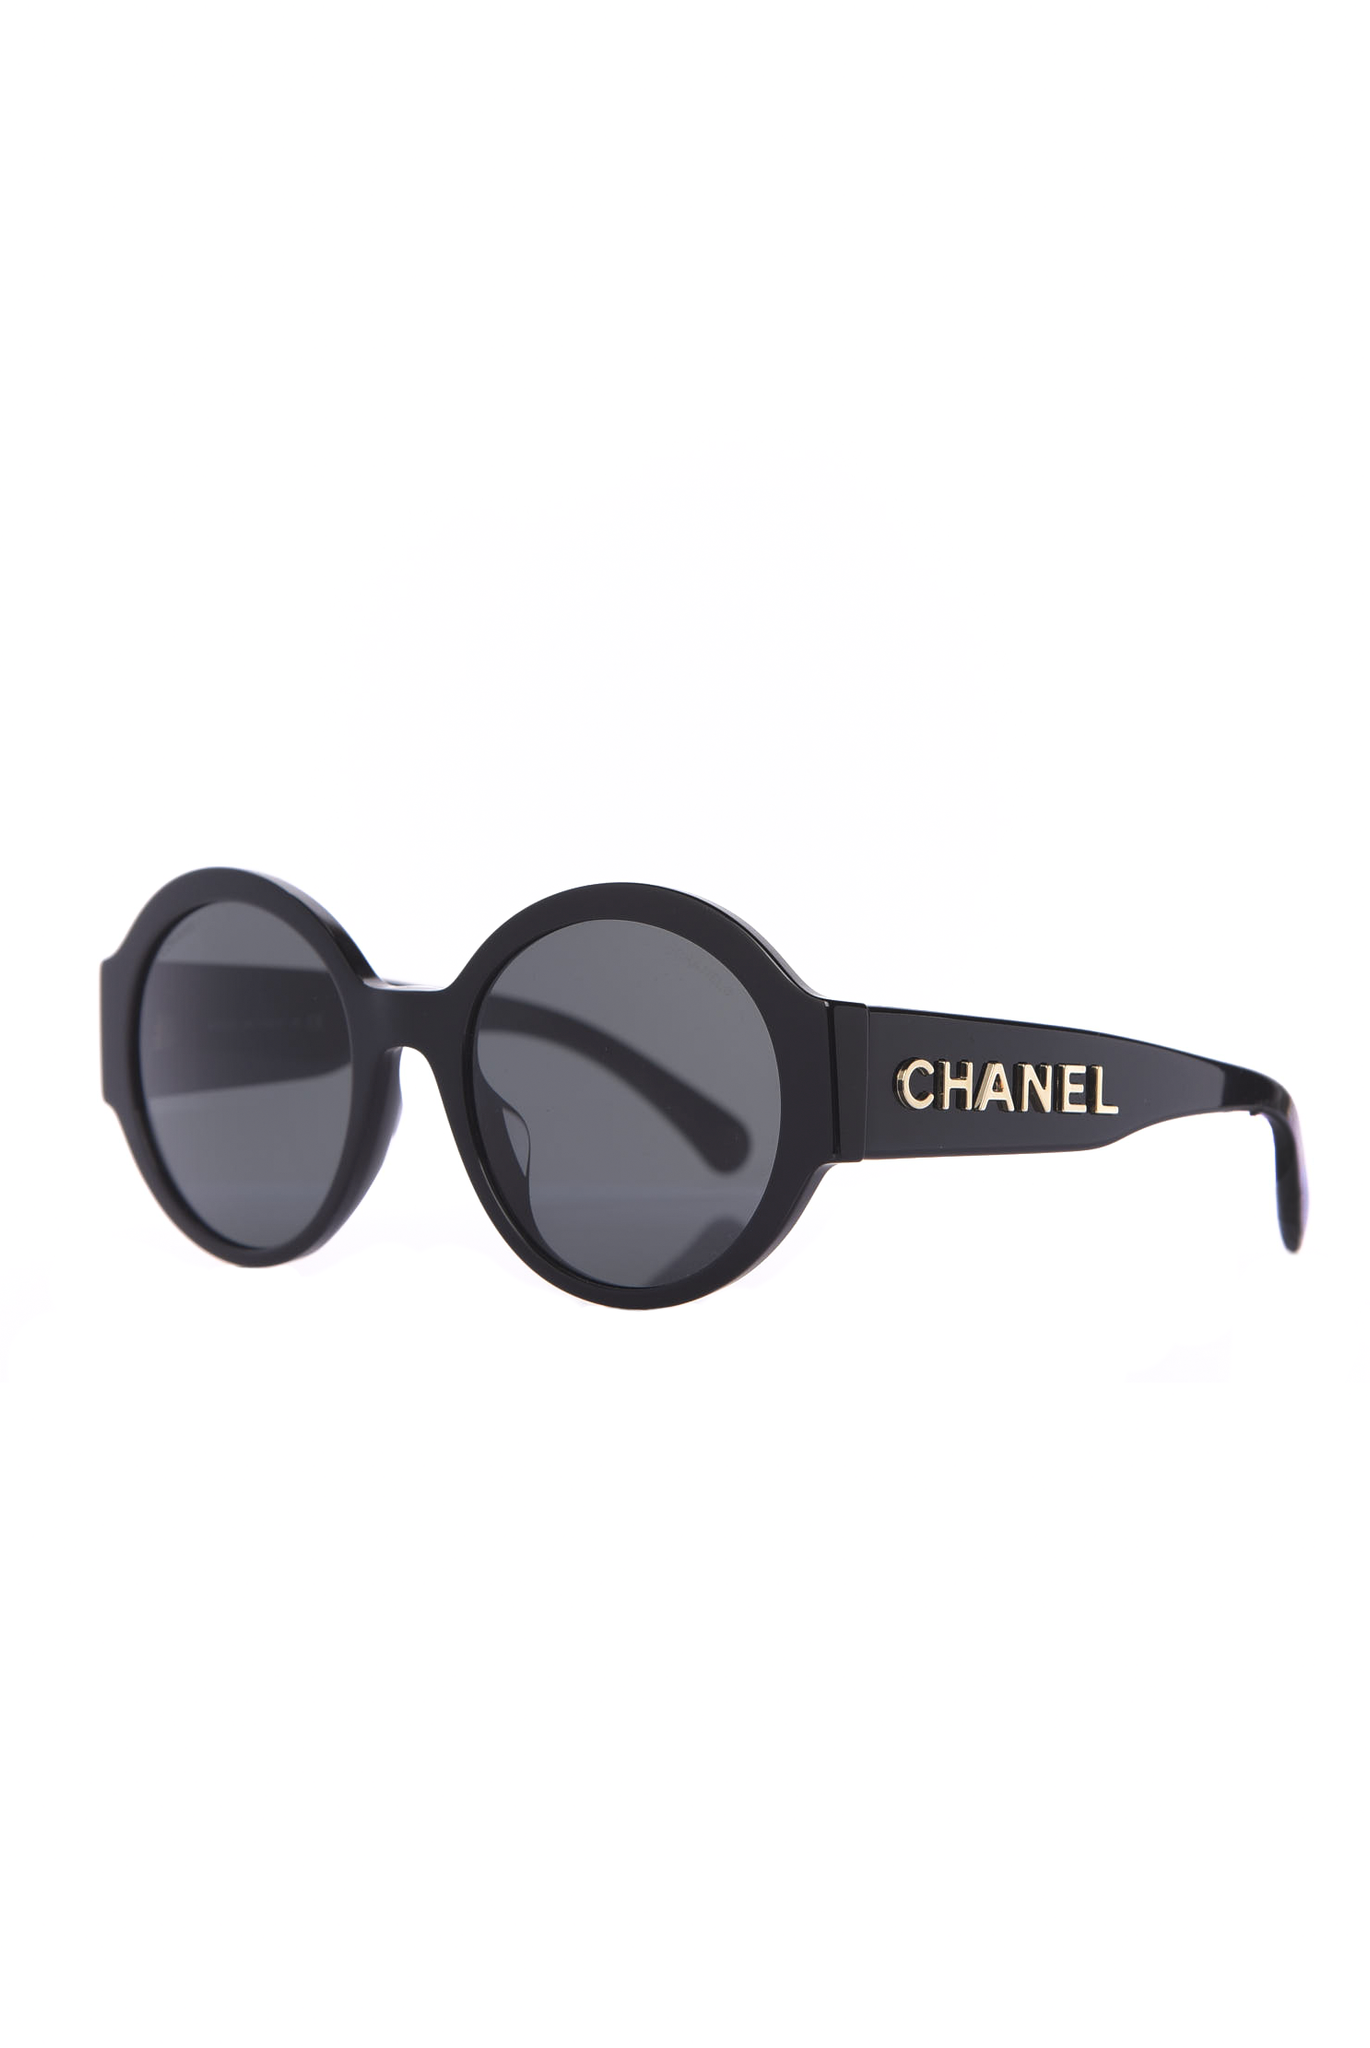 Vintage CHANEL black round frame mod sunglasses with white CHANEL